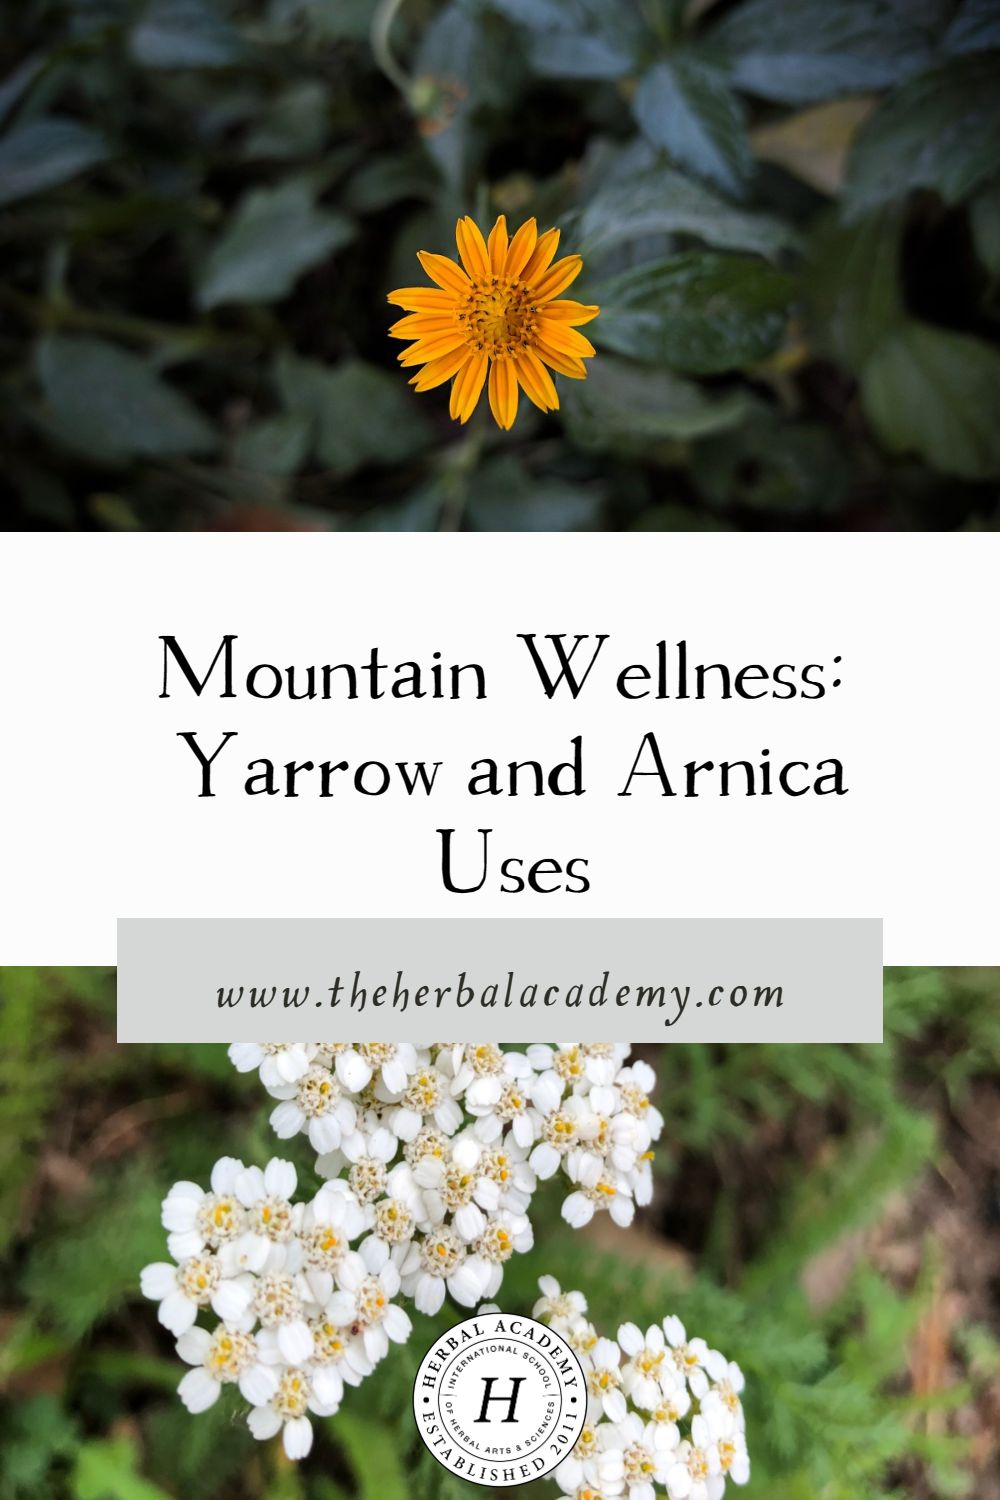 Mountain Wellness: Yarrow and Arnica Uses | Herbal Academy | Yarrow and arnica tinctures are great mountain wellness to add to your first aid kit. Knowing how to use them is incredibly empowering!